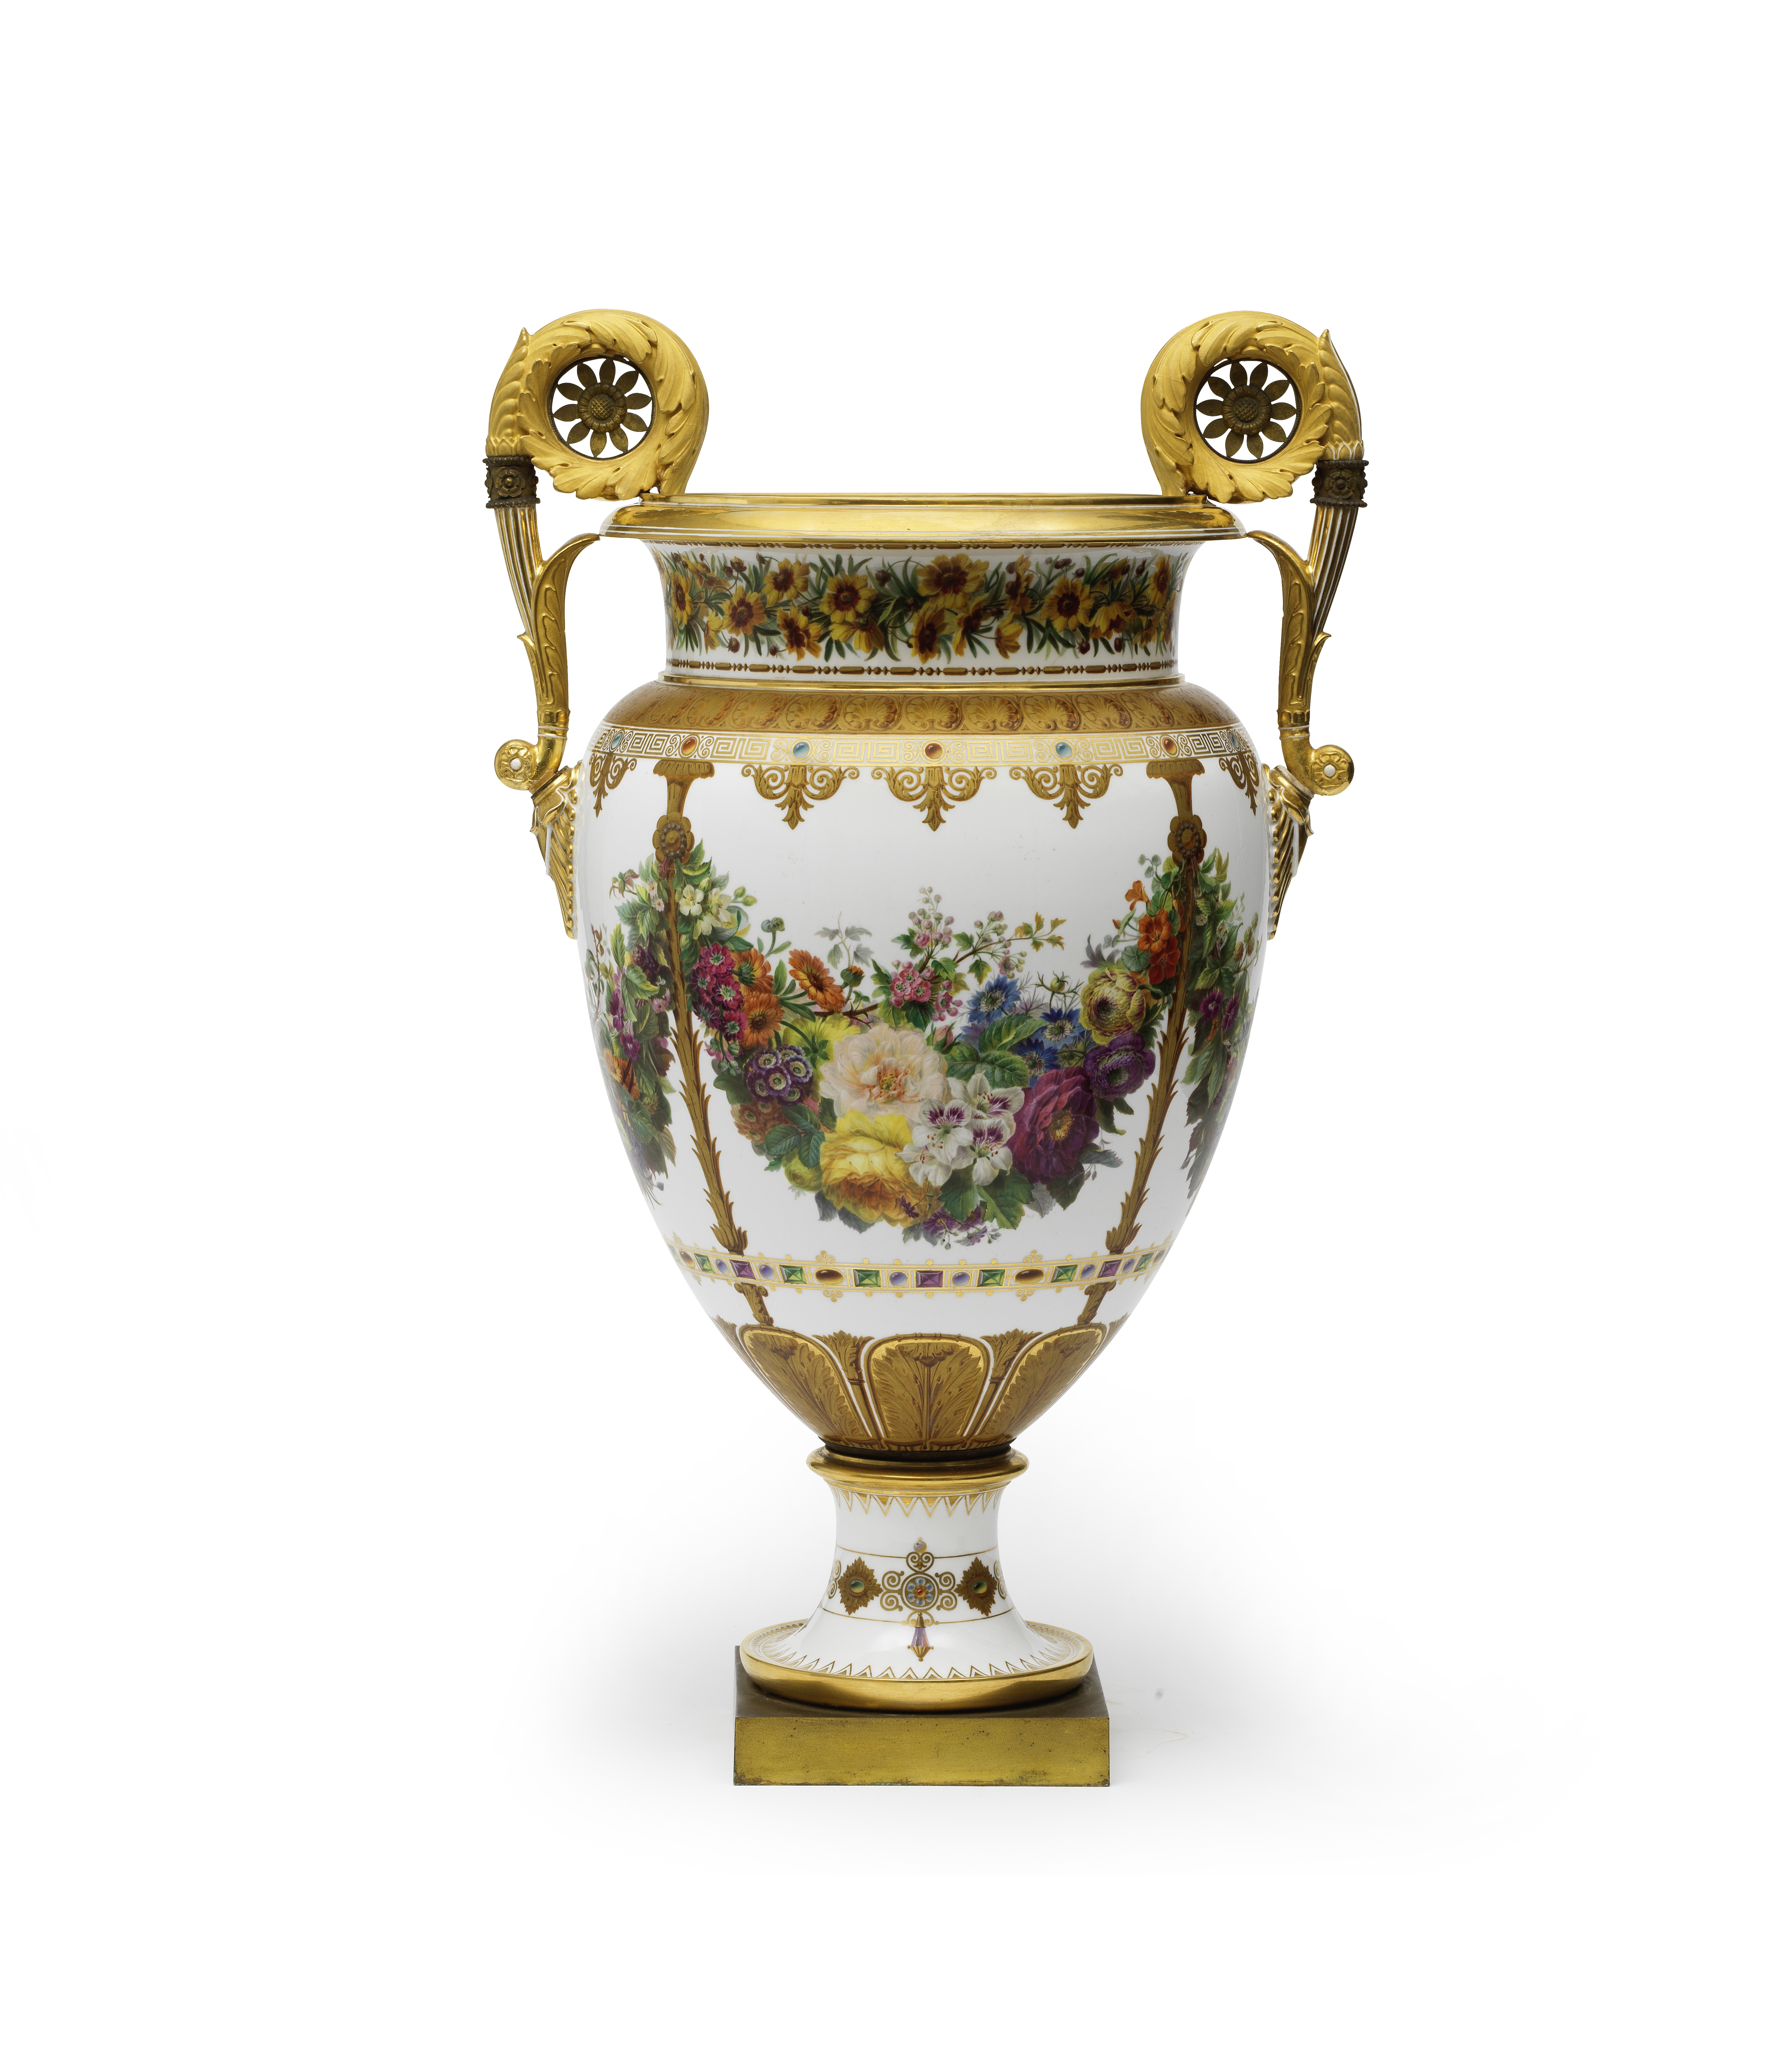 A large S&#232;vres vase (vase 'Th&#233;ricl&#233;ens') given by King Louis Philippe I to Willia...